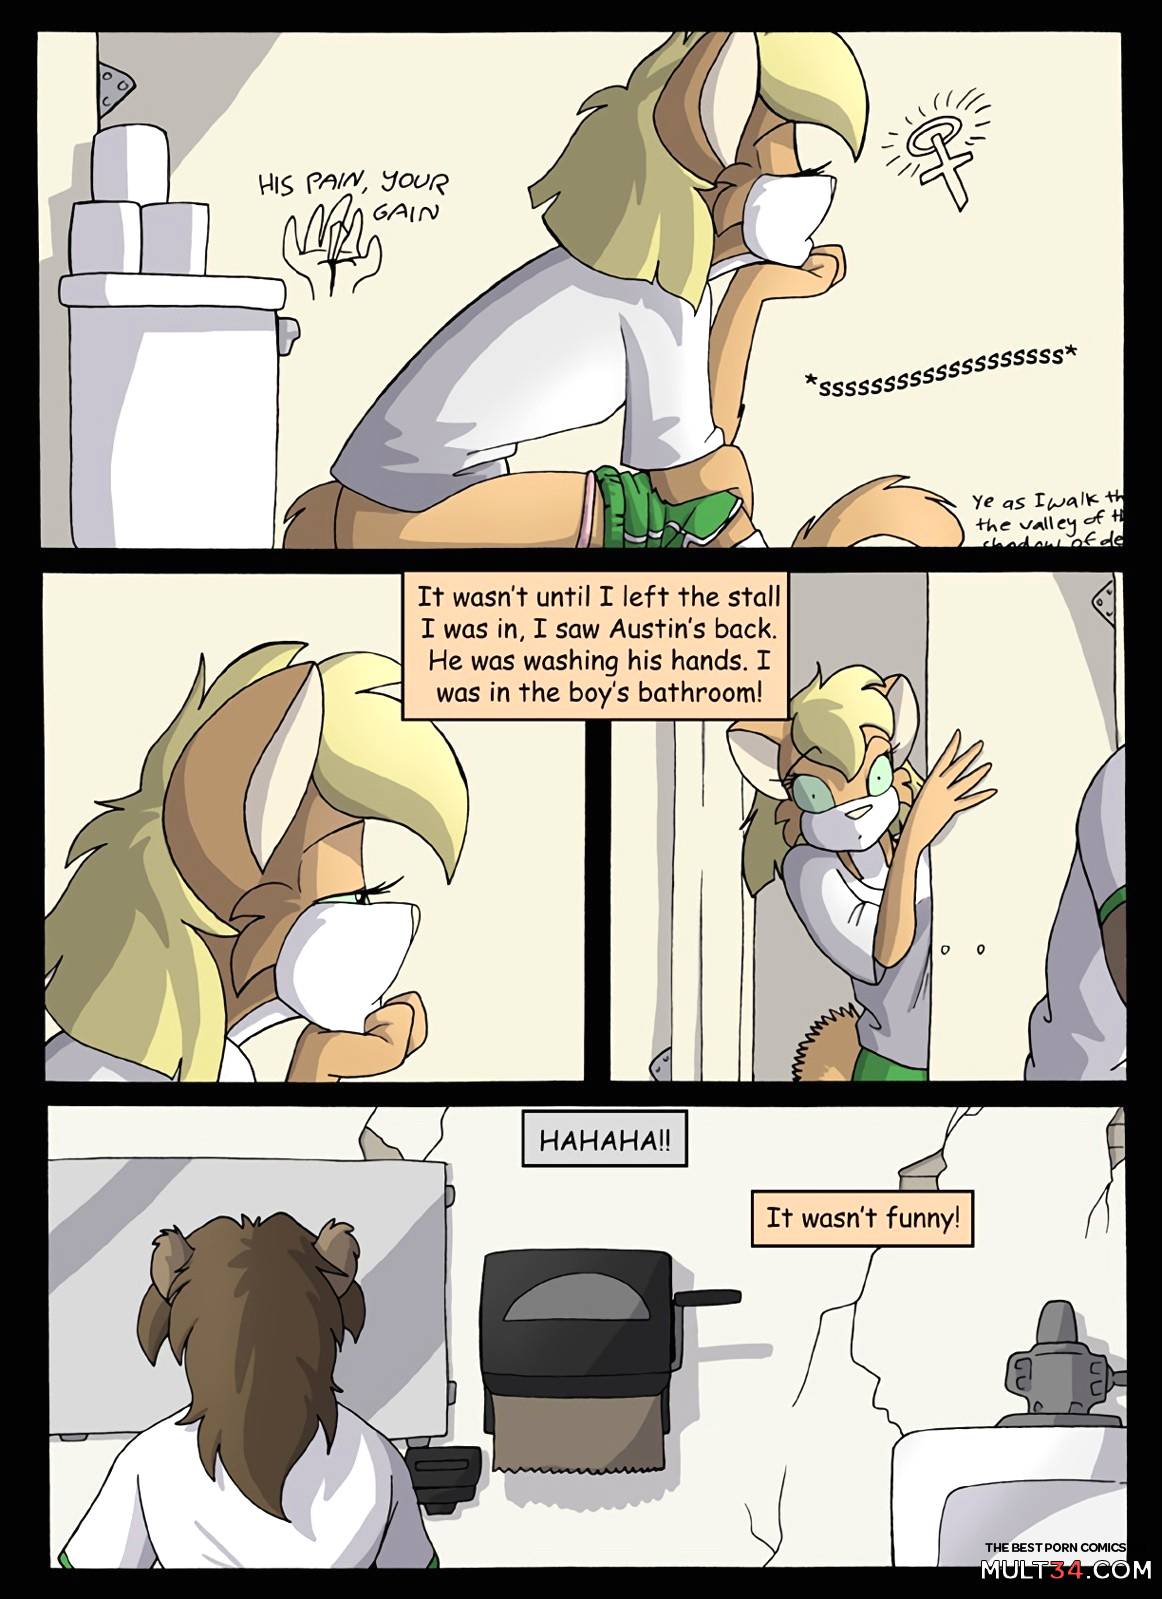 Amy's Little Lamb, Summer Camp Adventure page 10